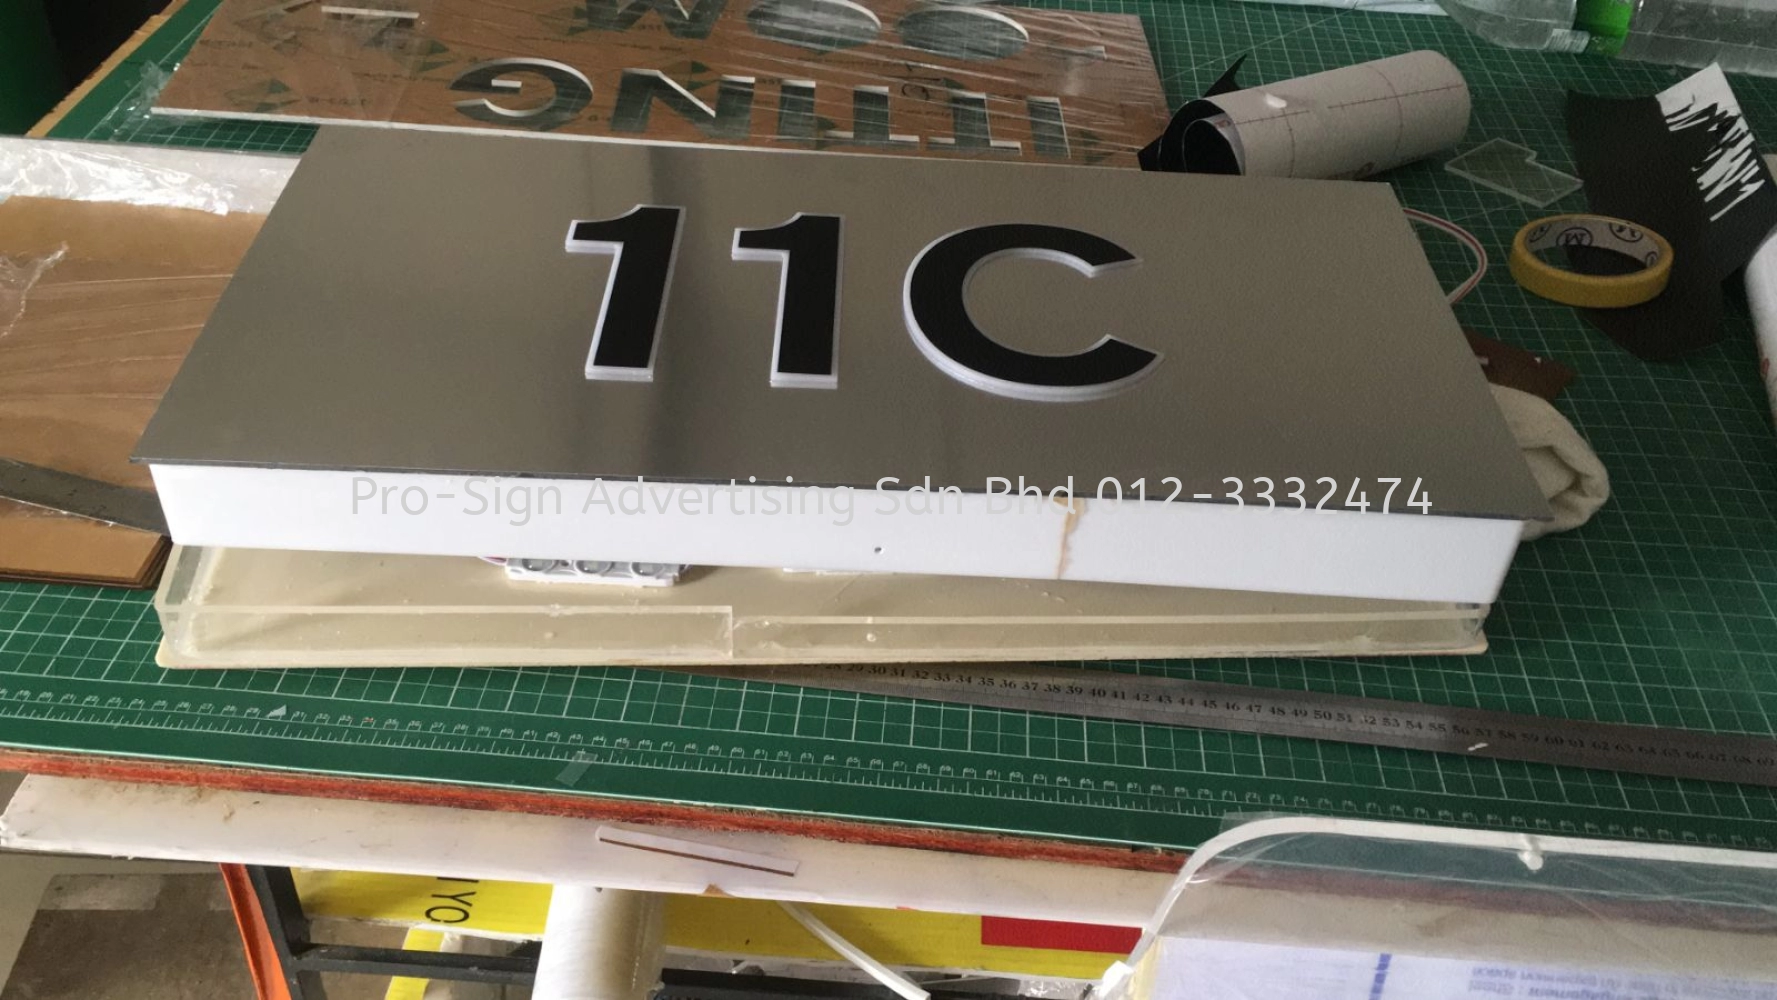 ACRYLIC LIGHTOX WITH ACM ROUTER CUT OUT NUMBERING (HOUSE NUMBER SIGN, 2022, SUBANG JAYA)